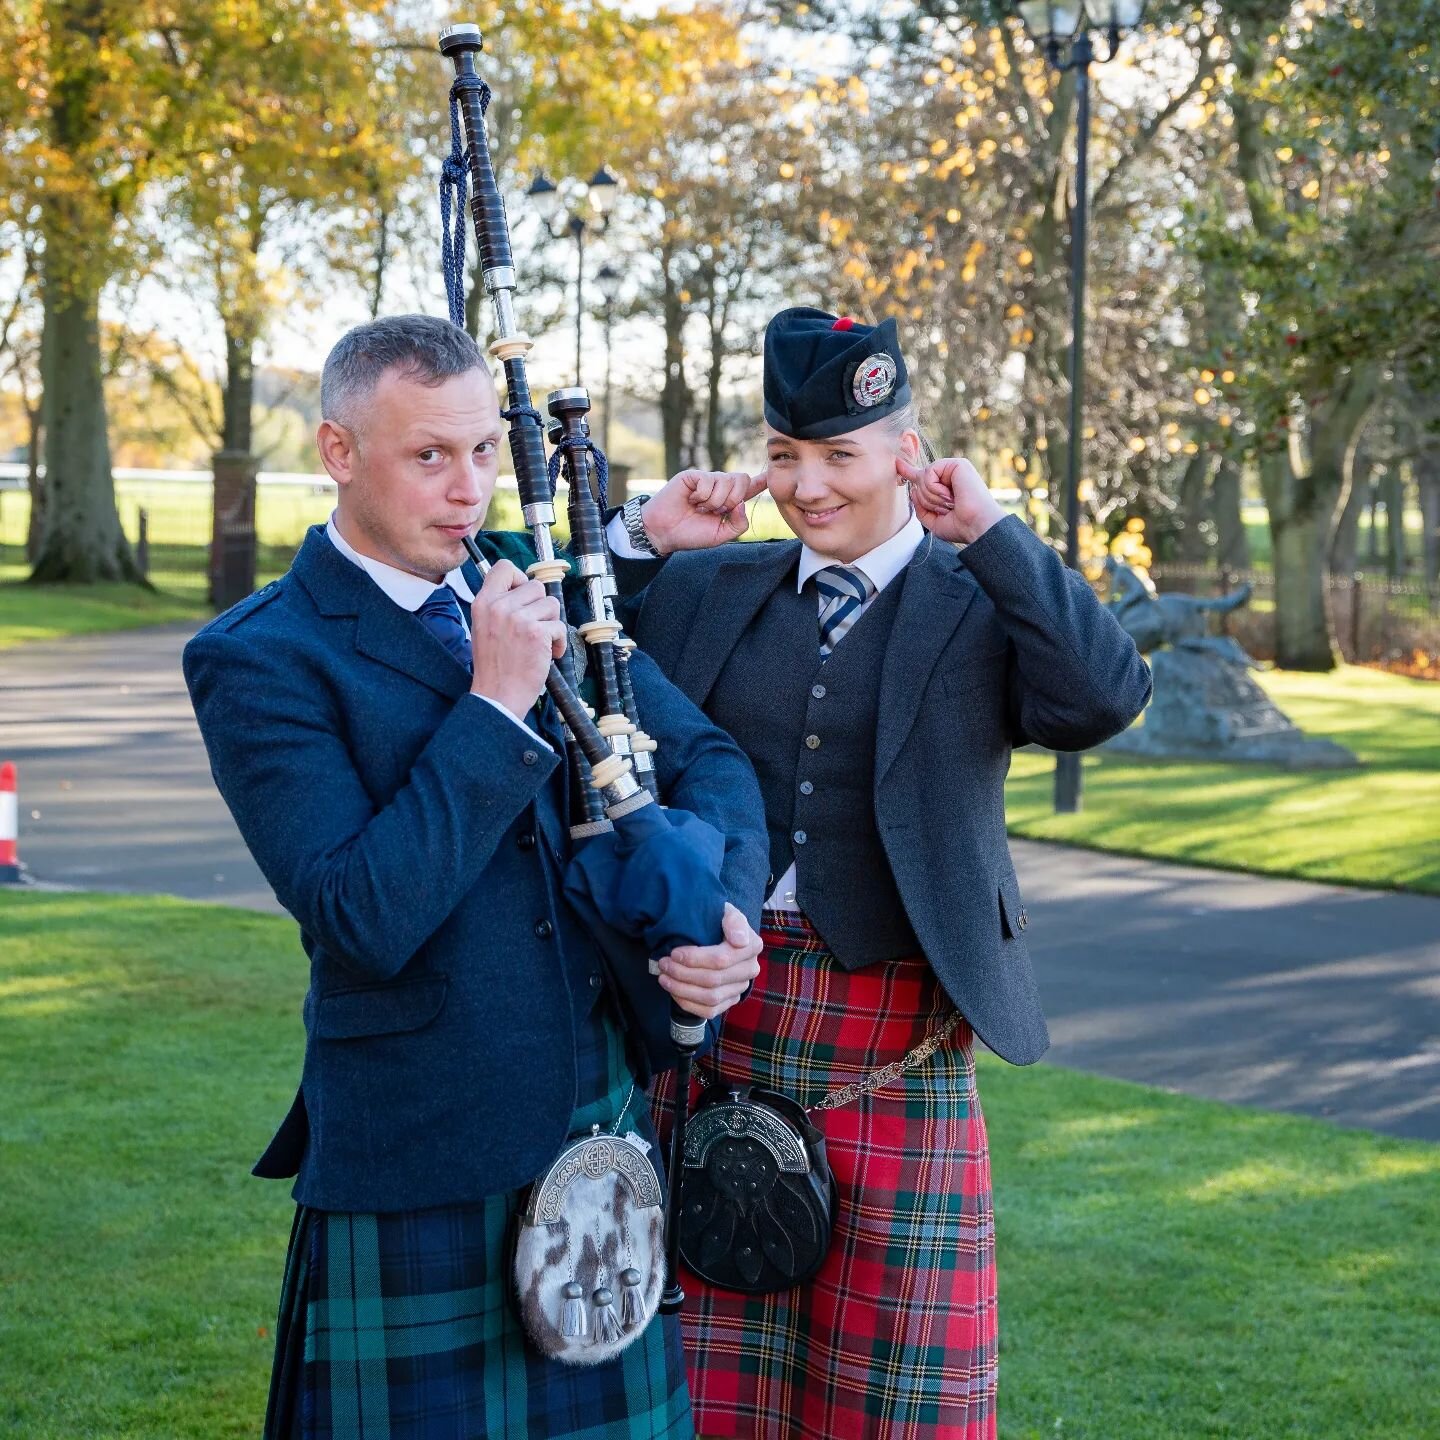 Cover your ears, and i think it's best to leave the pipping to the piper Fraser 

#ayrshirewedding #ayrshireweddingphotographer #ayrshirephotographer #ayr #ayrshire #thomasmccabephotography #myscotlandwedding #nikon #sigma2470art #scottishphotographe